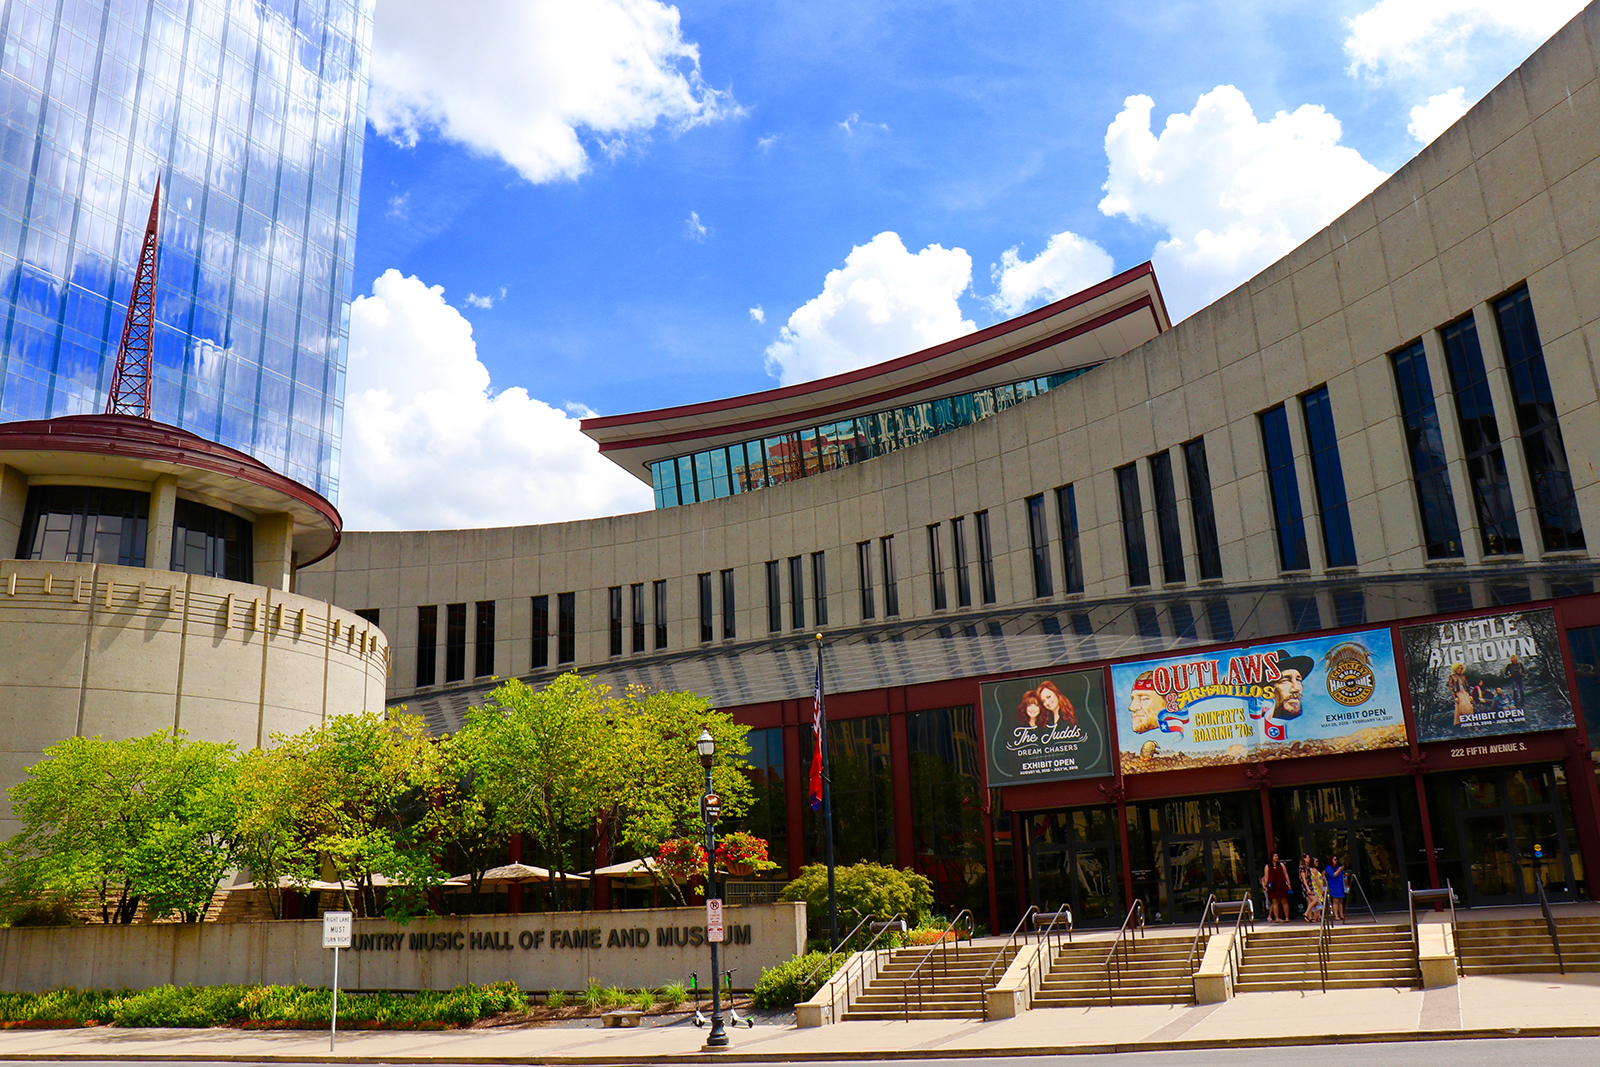 Photo of the Country Music Hall of Fame in Nashville